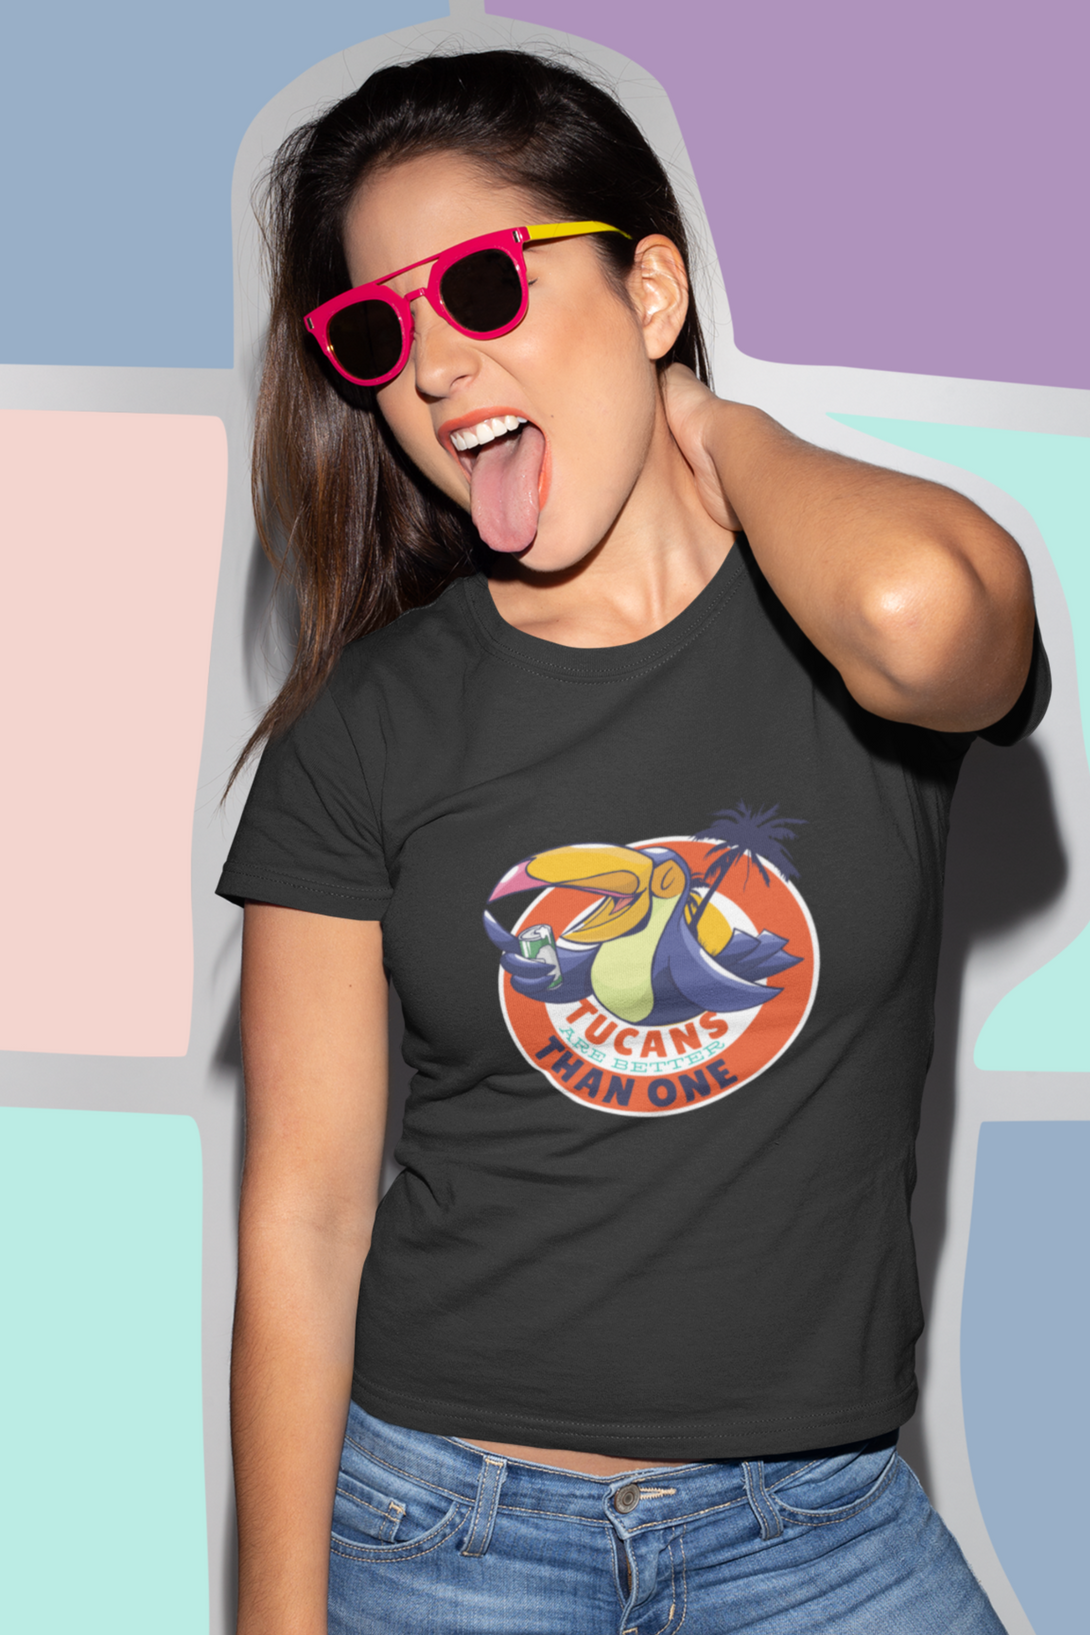 Tucans Are Better Tha One Printed T-Shirt For Women - WowWaves - 5